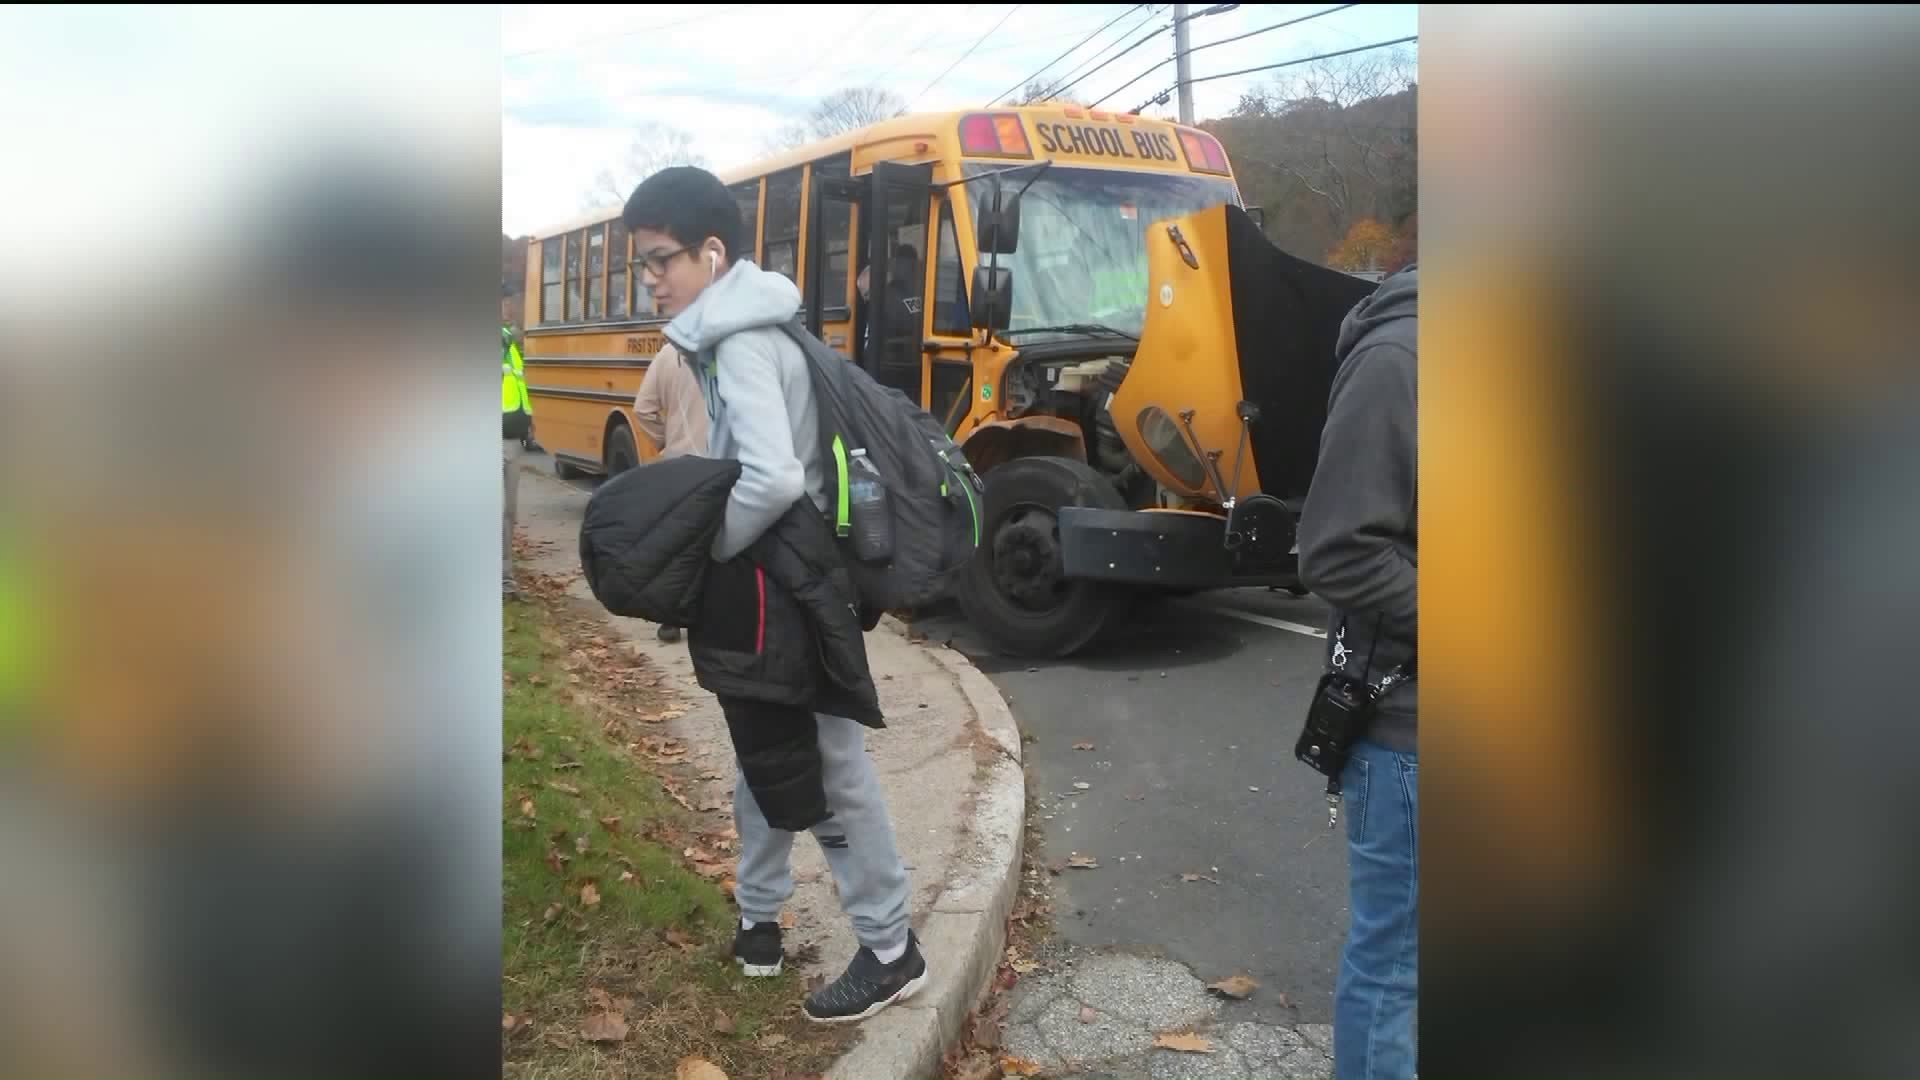 Distracted driver collides head on with school bus in Ansonia